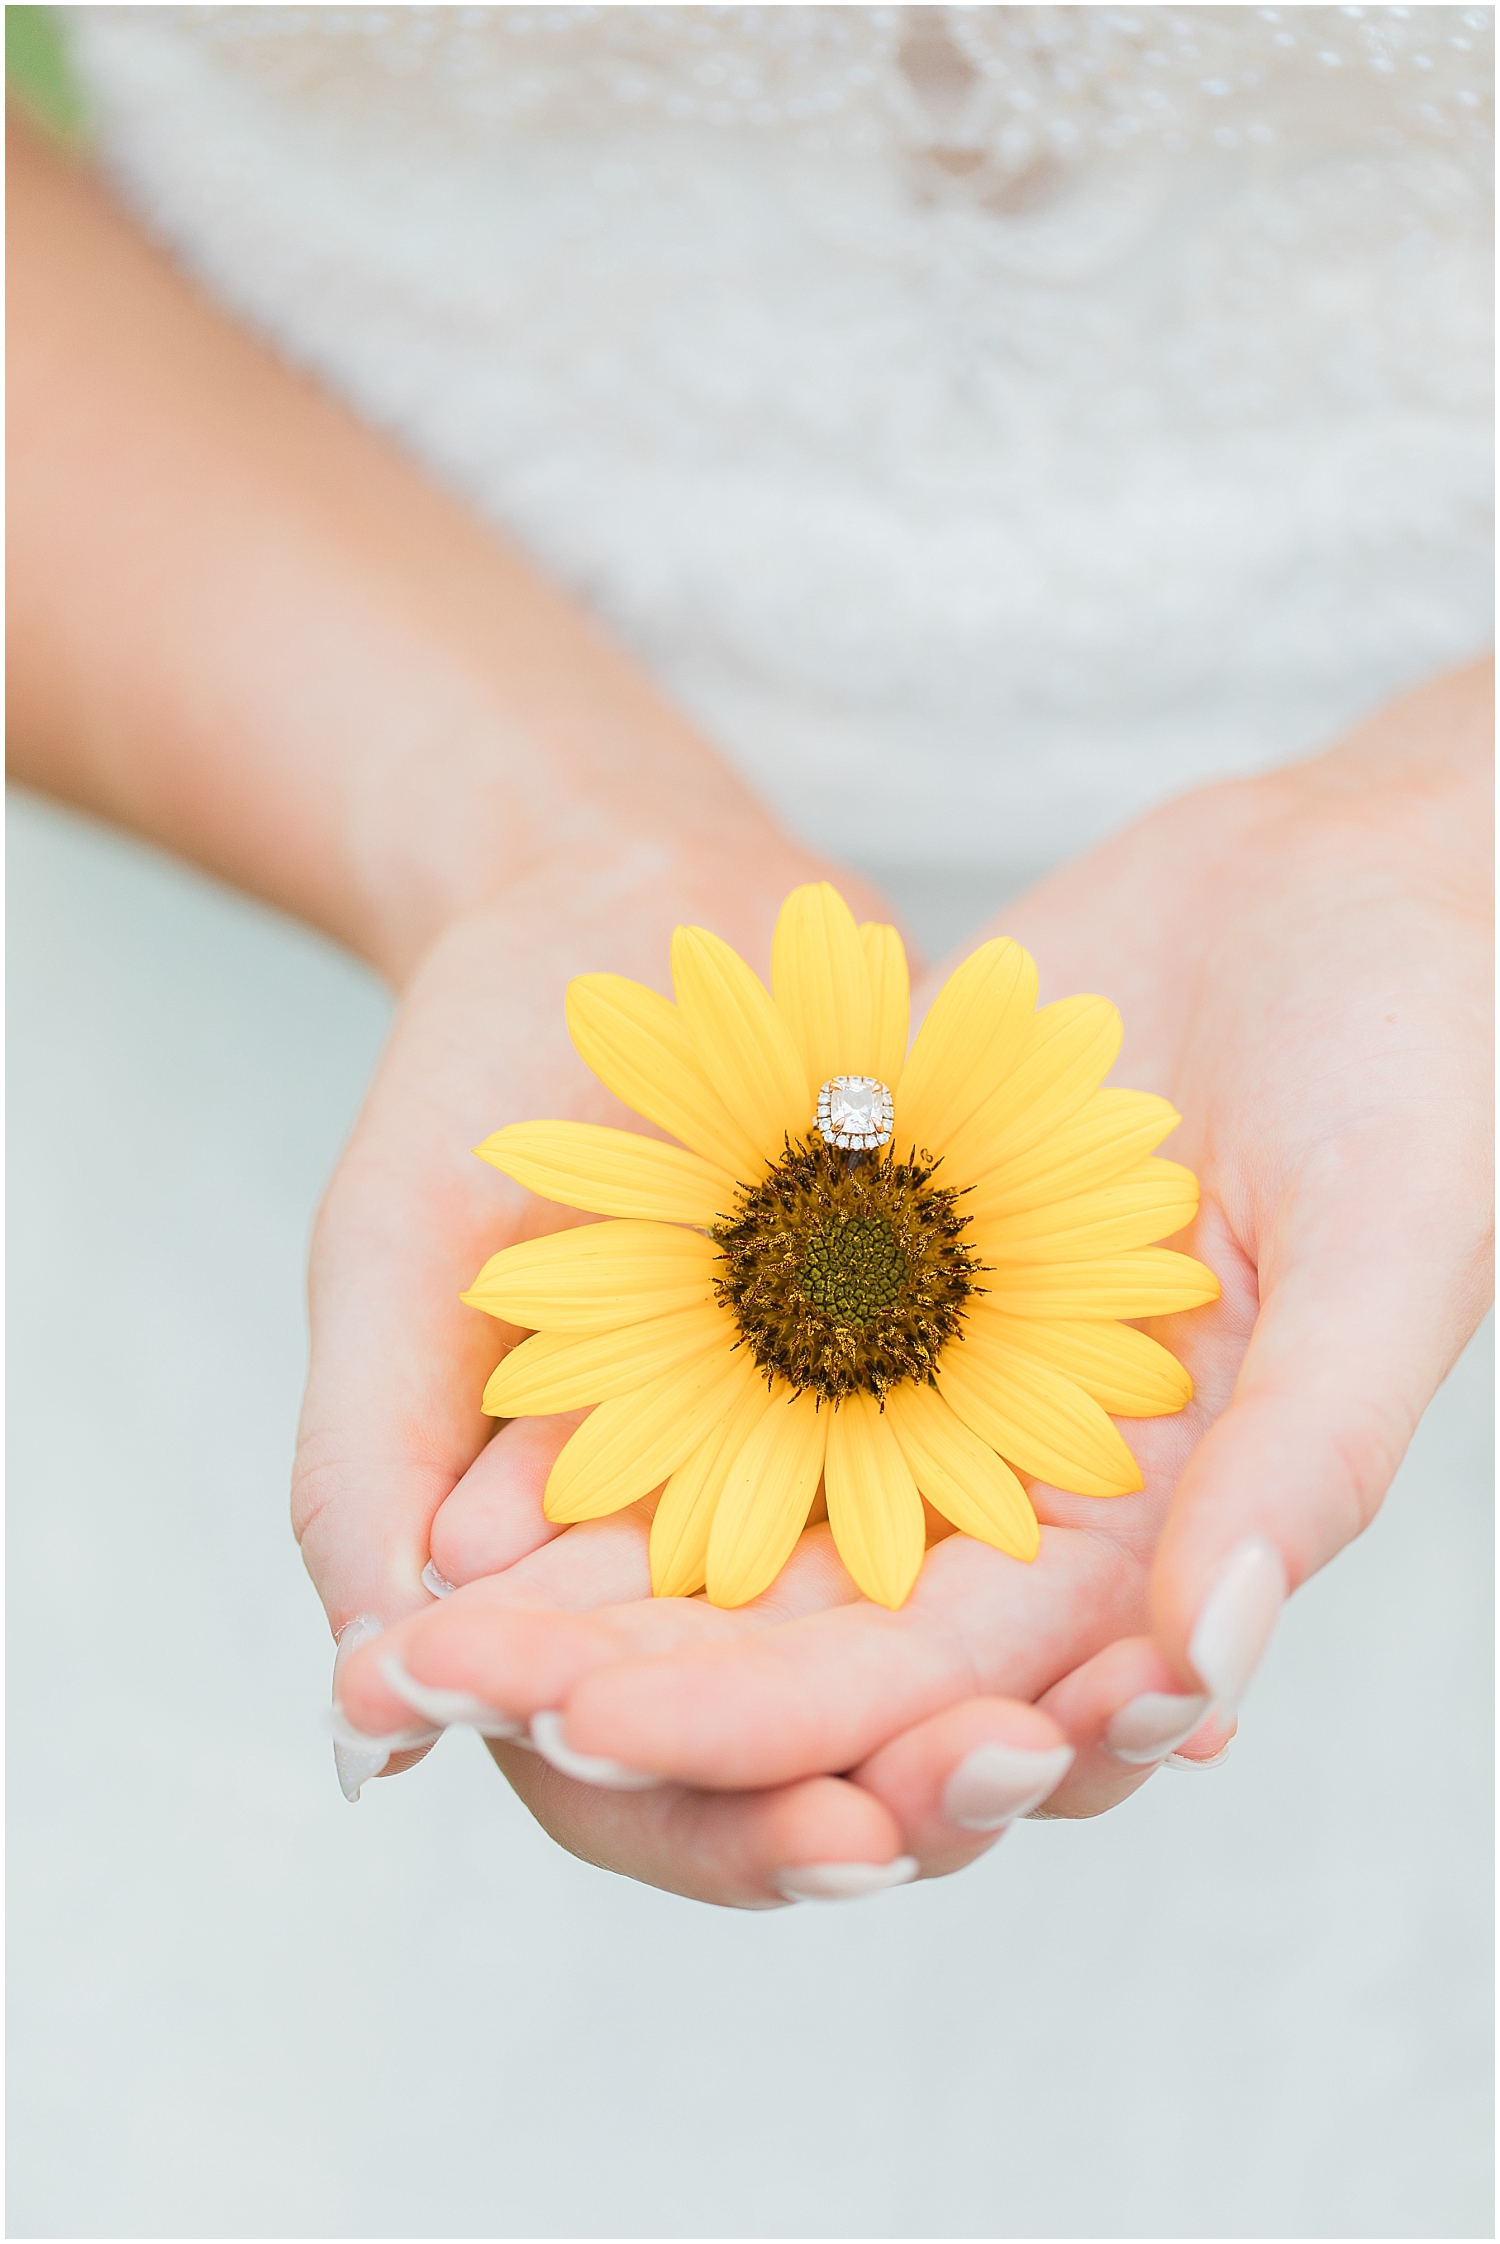  Sunflower and wedding ring 